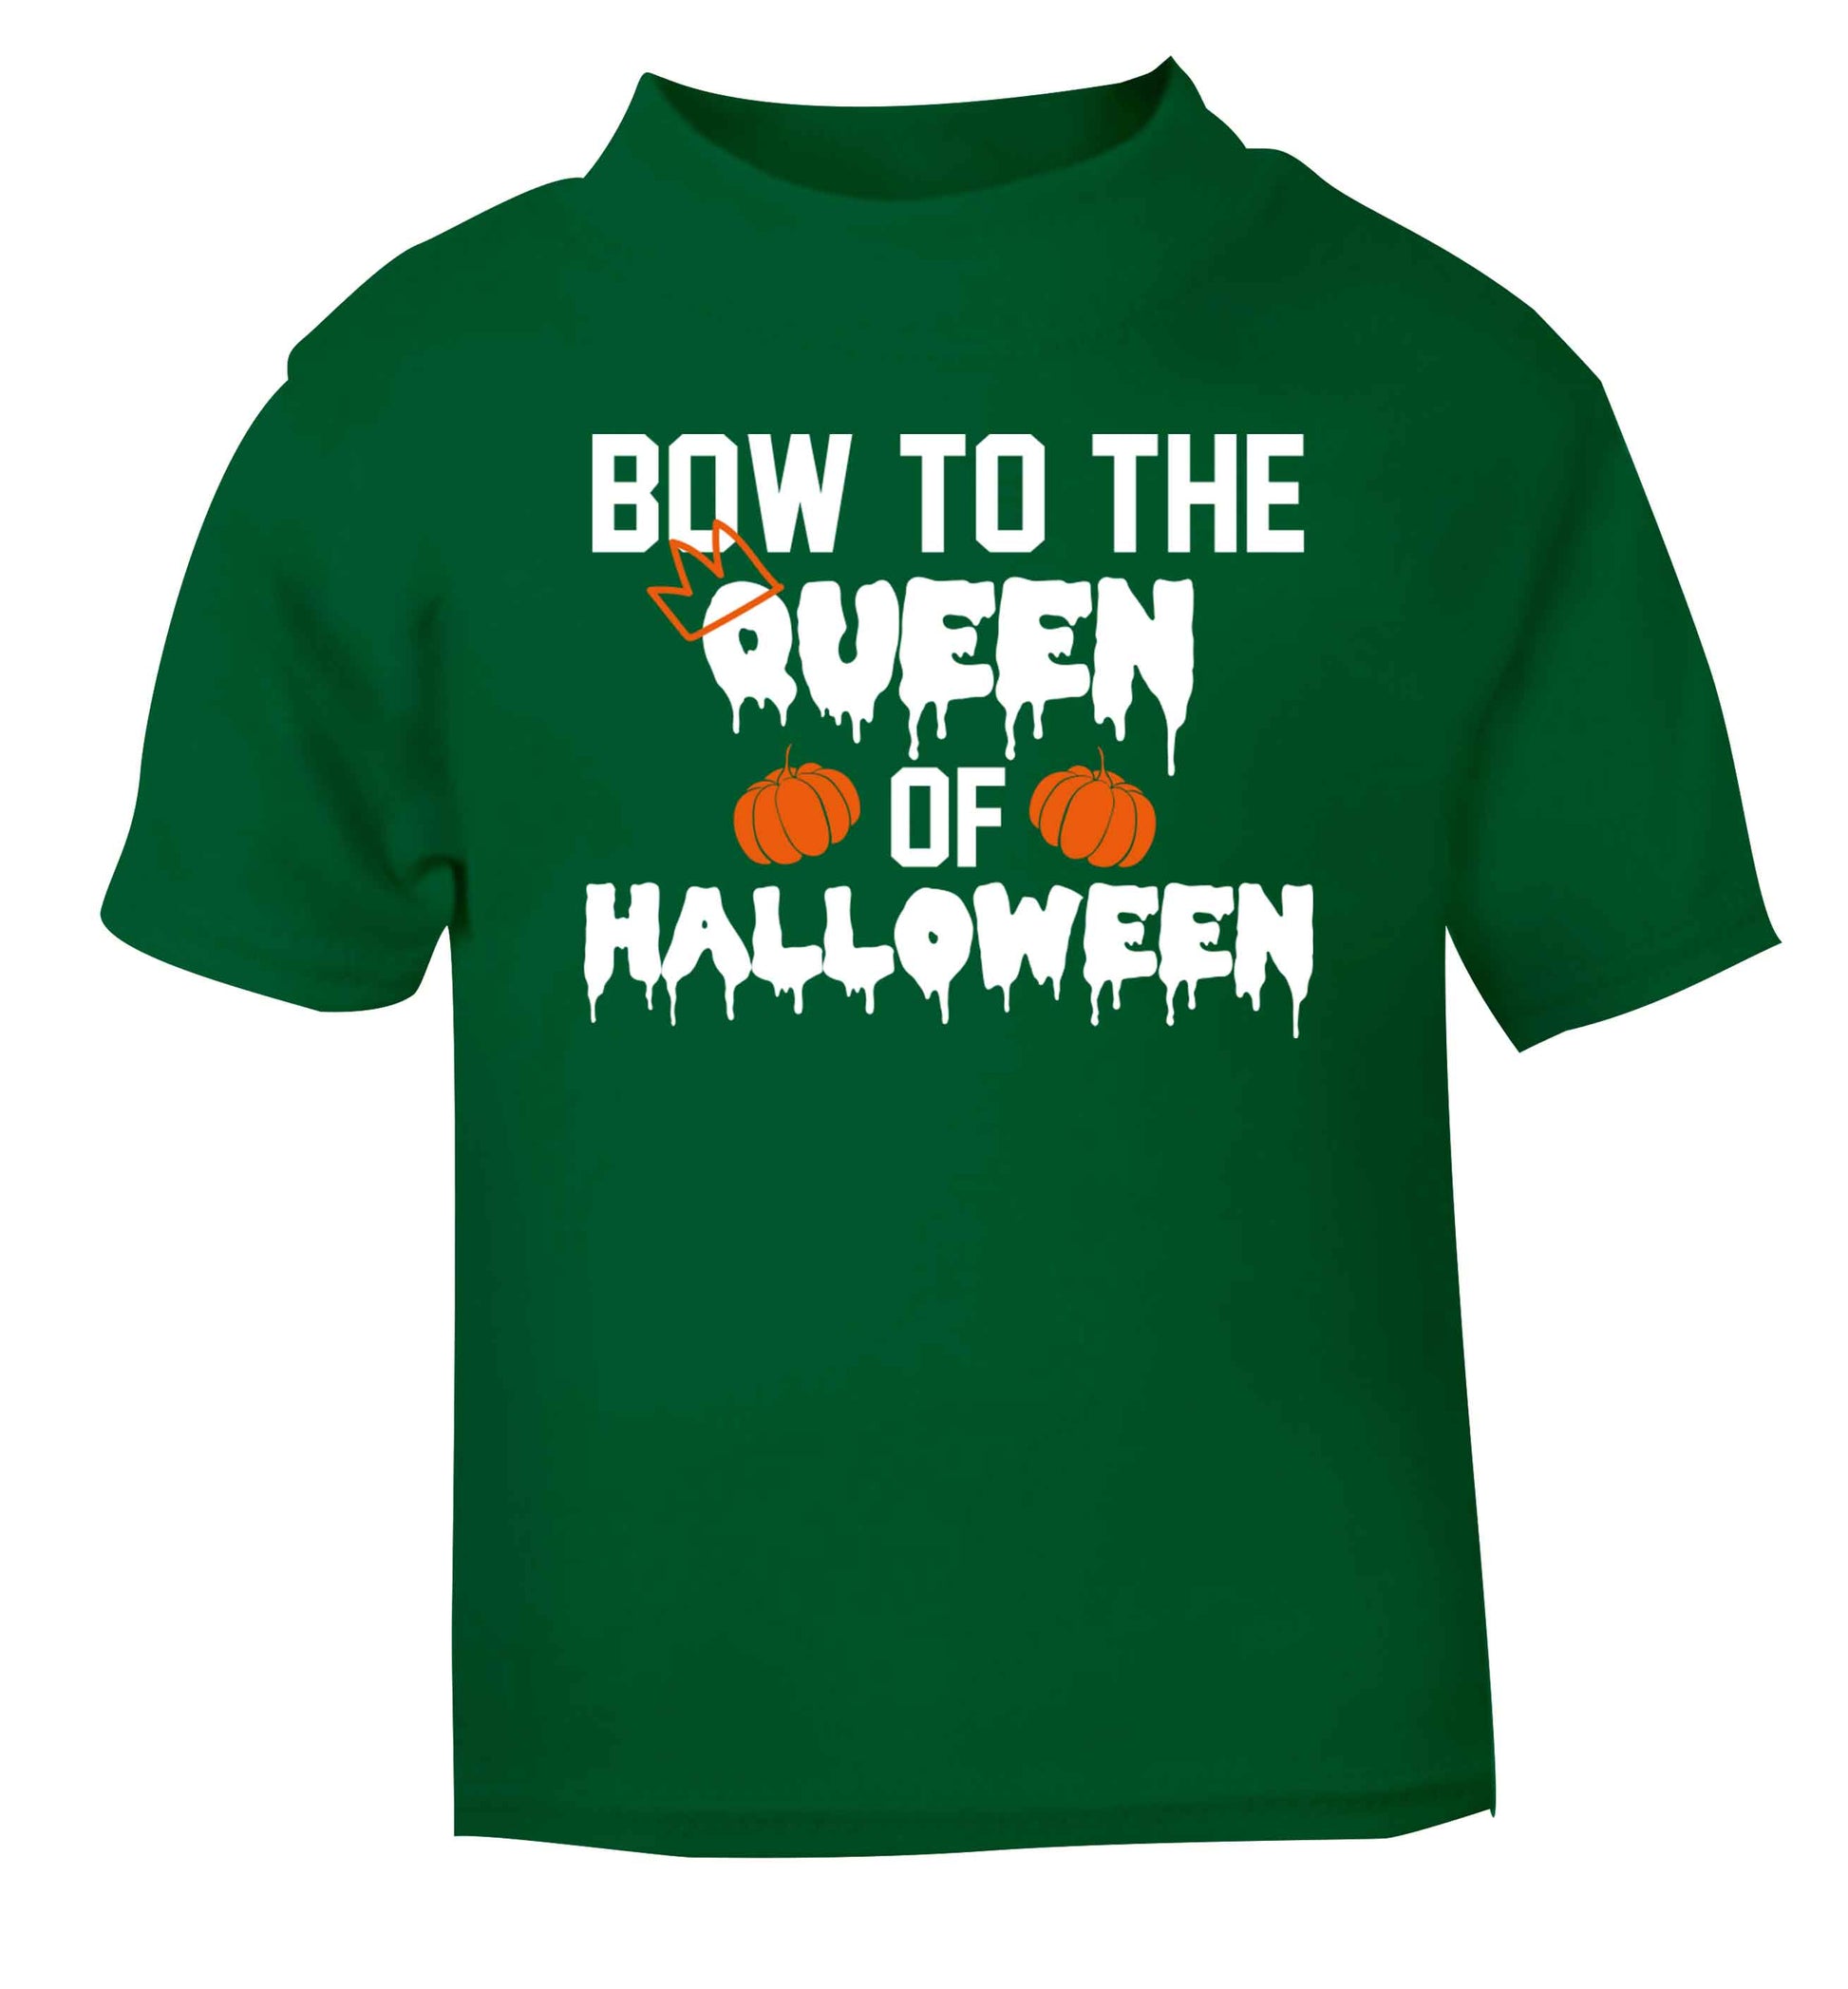 Bow to the Queen of halloween green baby toddler Tshirt 2 Years